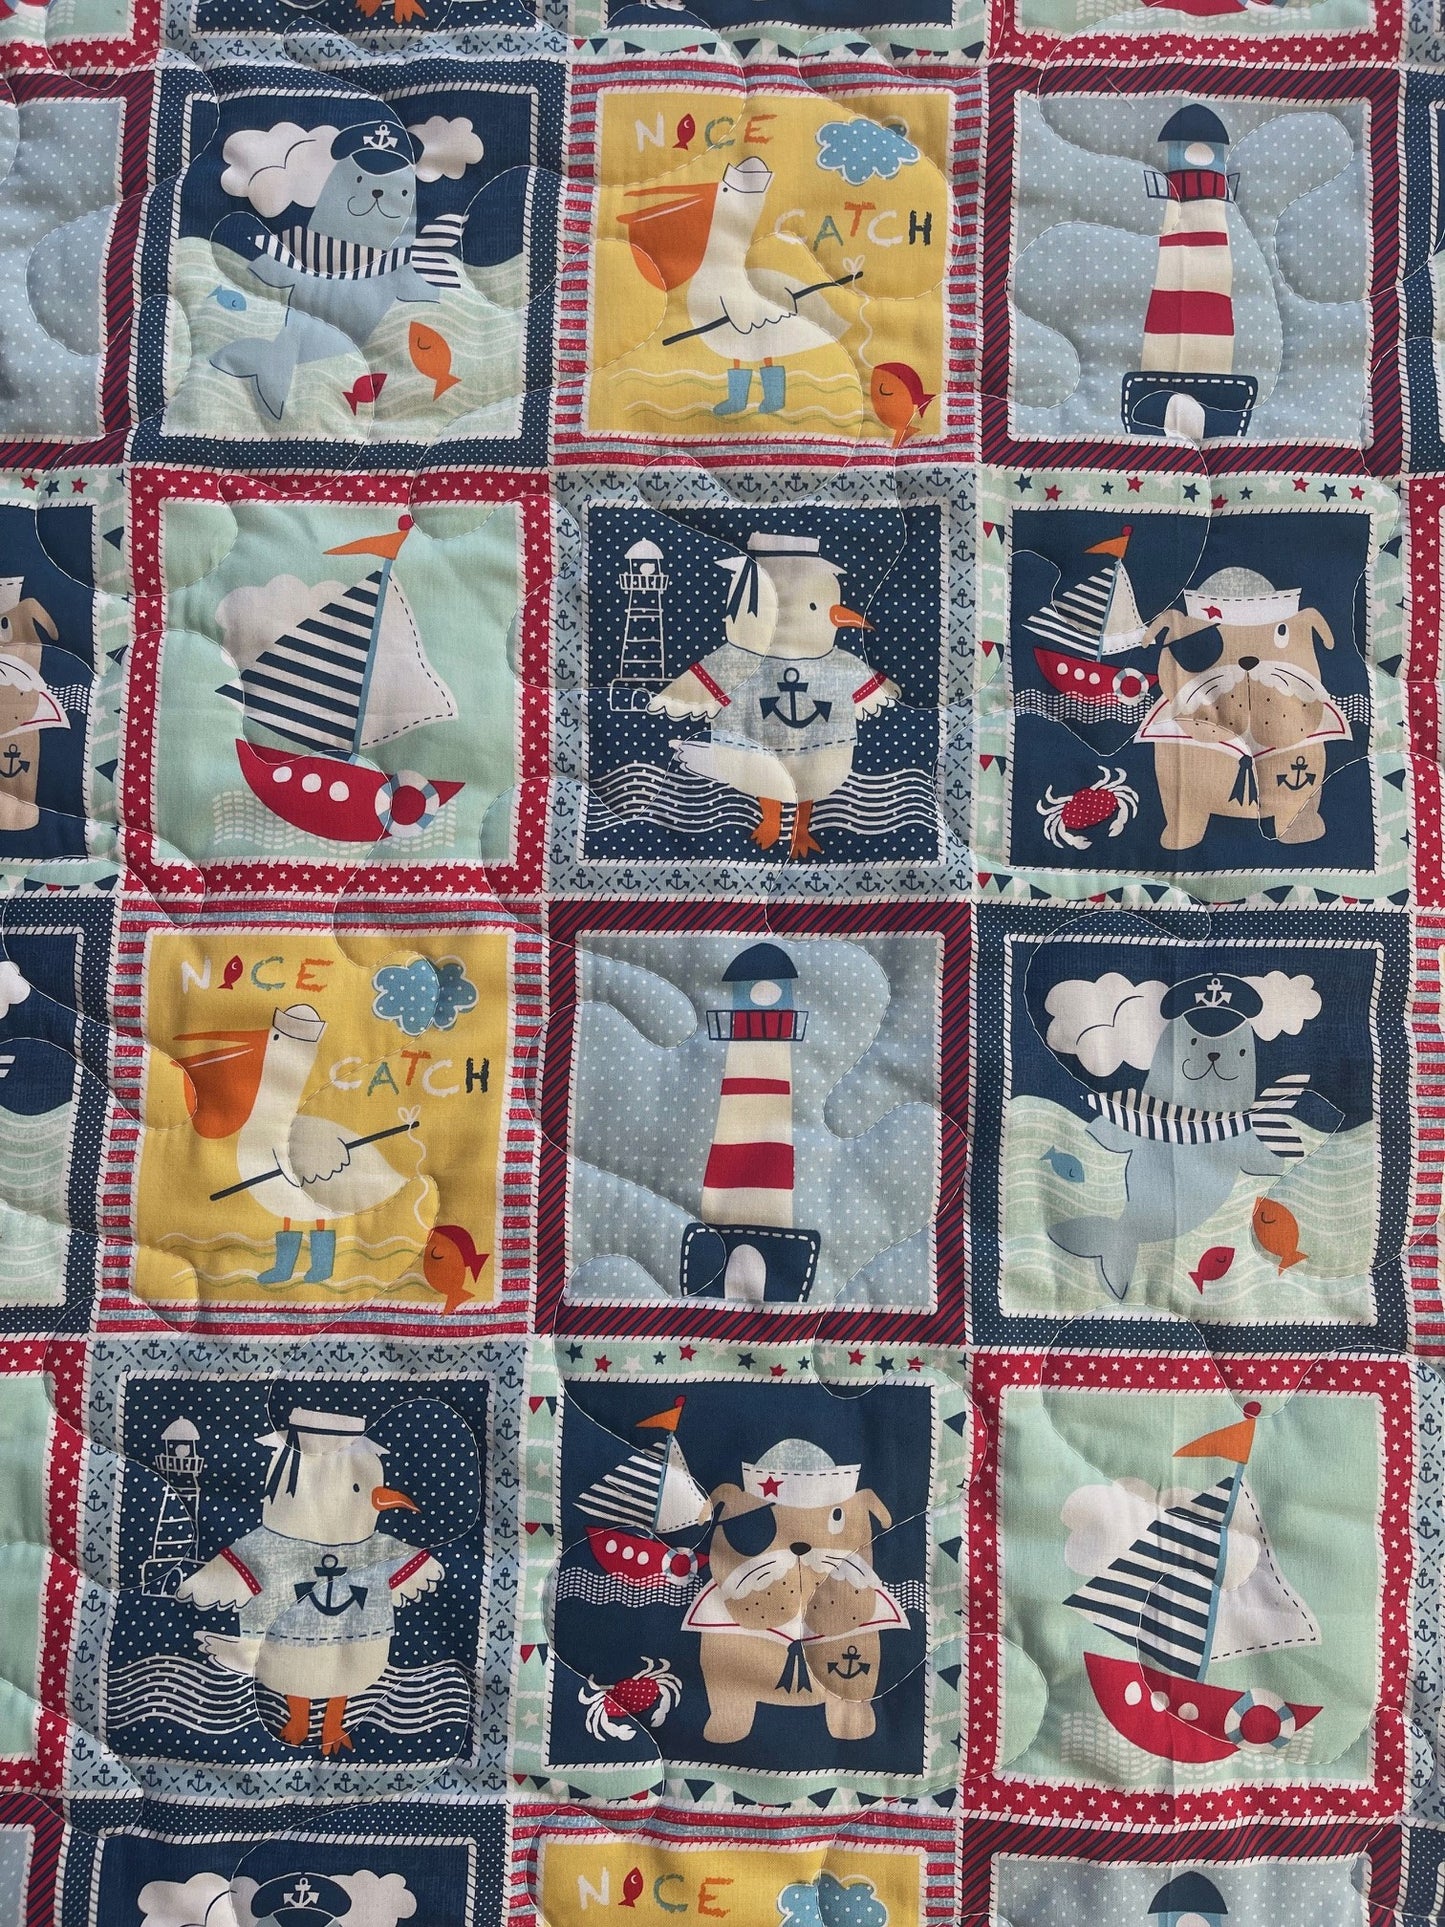 Nautical Block Nice Catch Primary Colors Quilted Blanket with Walrus, Lighthouse, Pelican, Sailboat